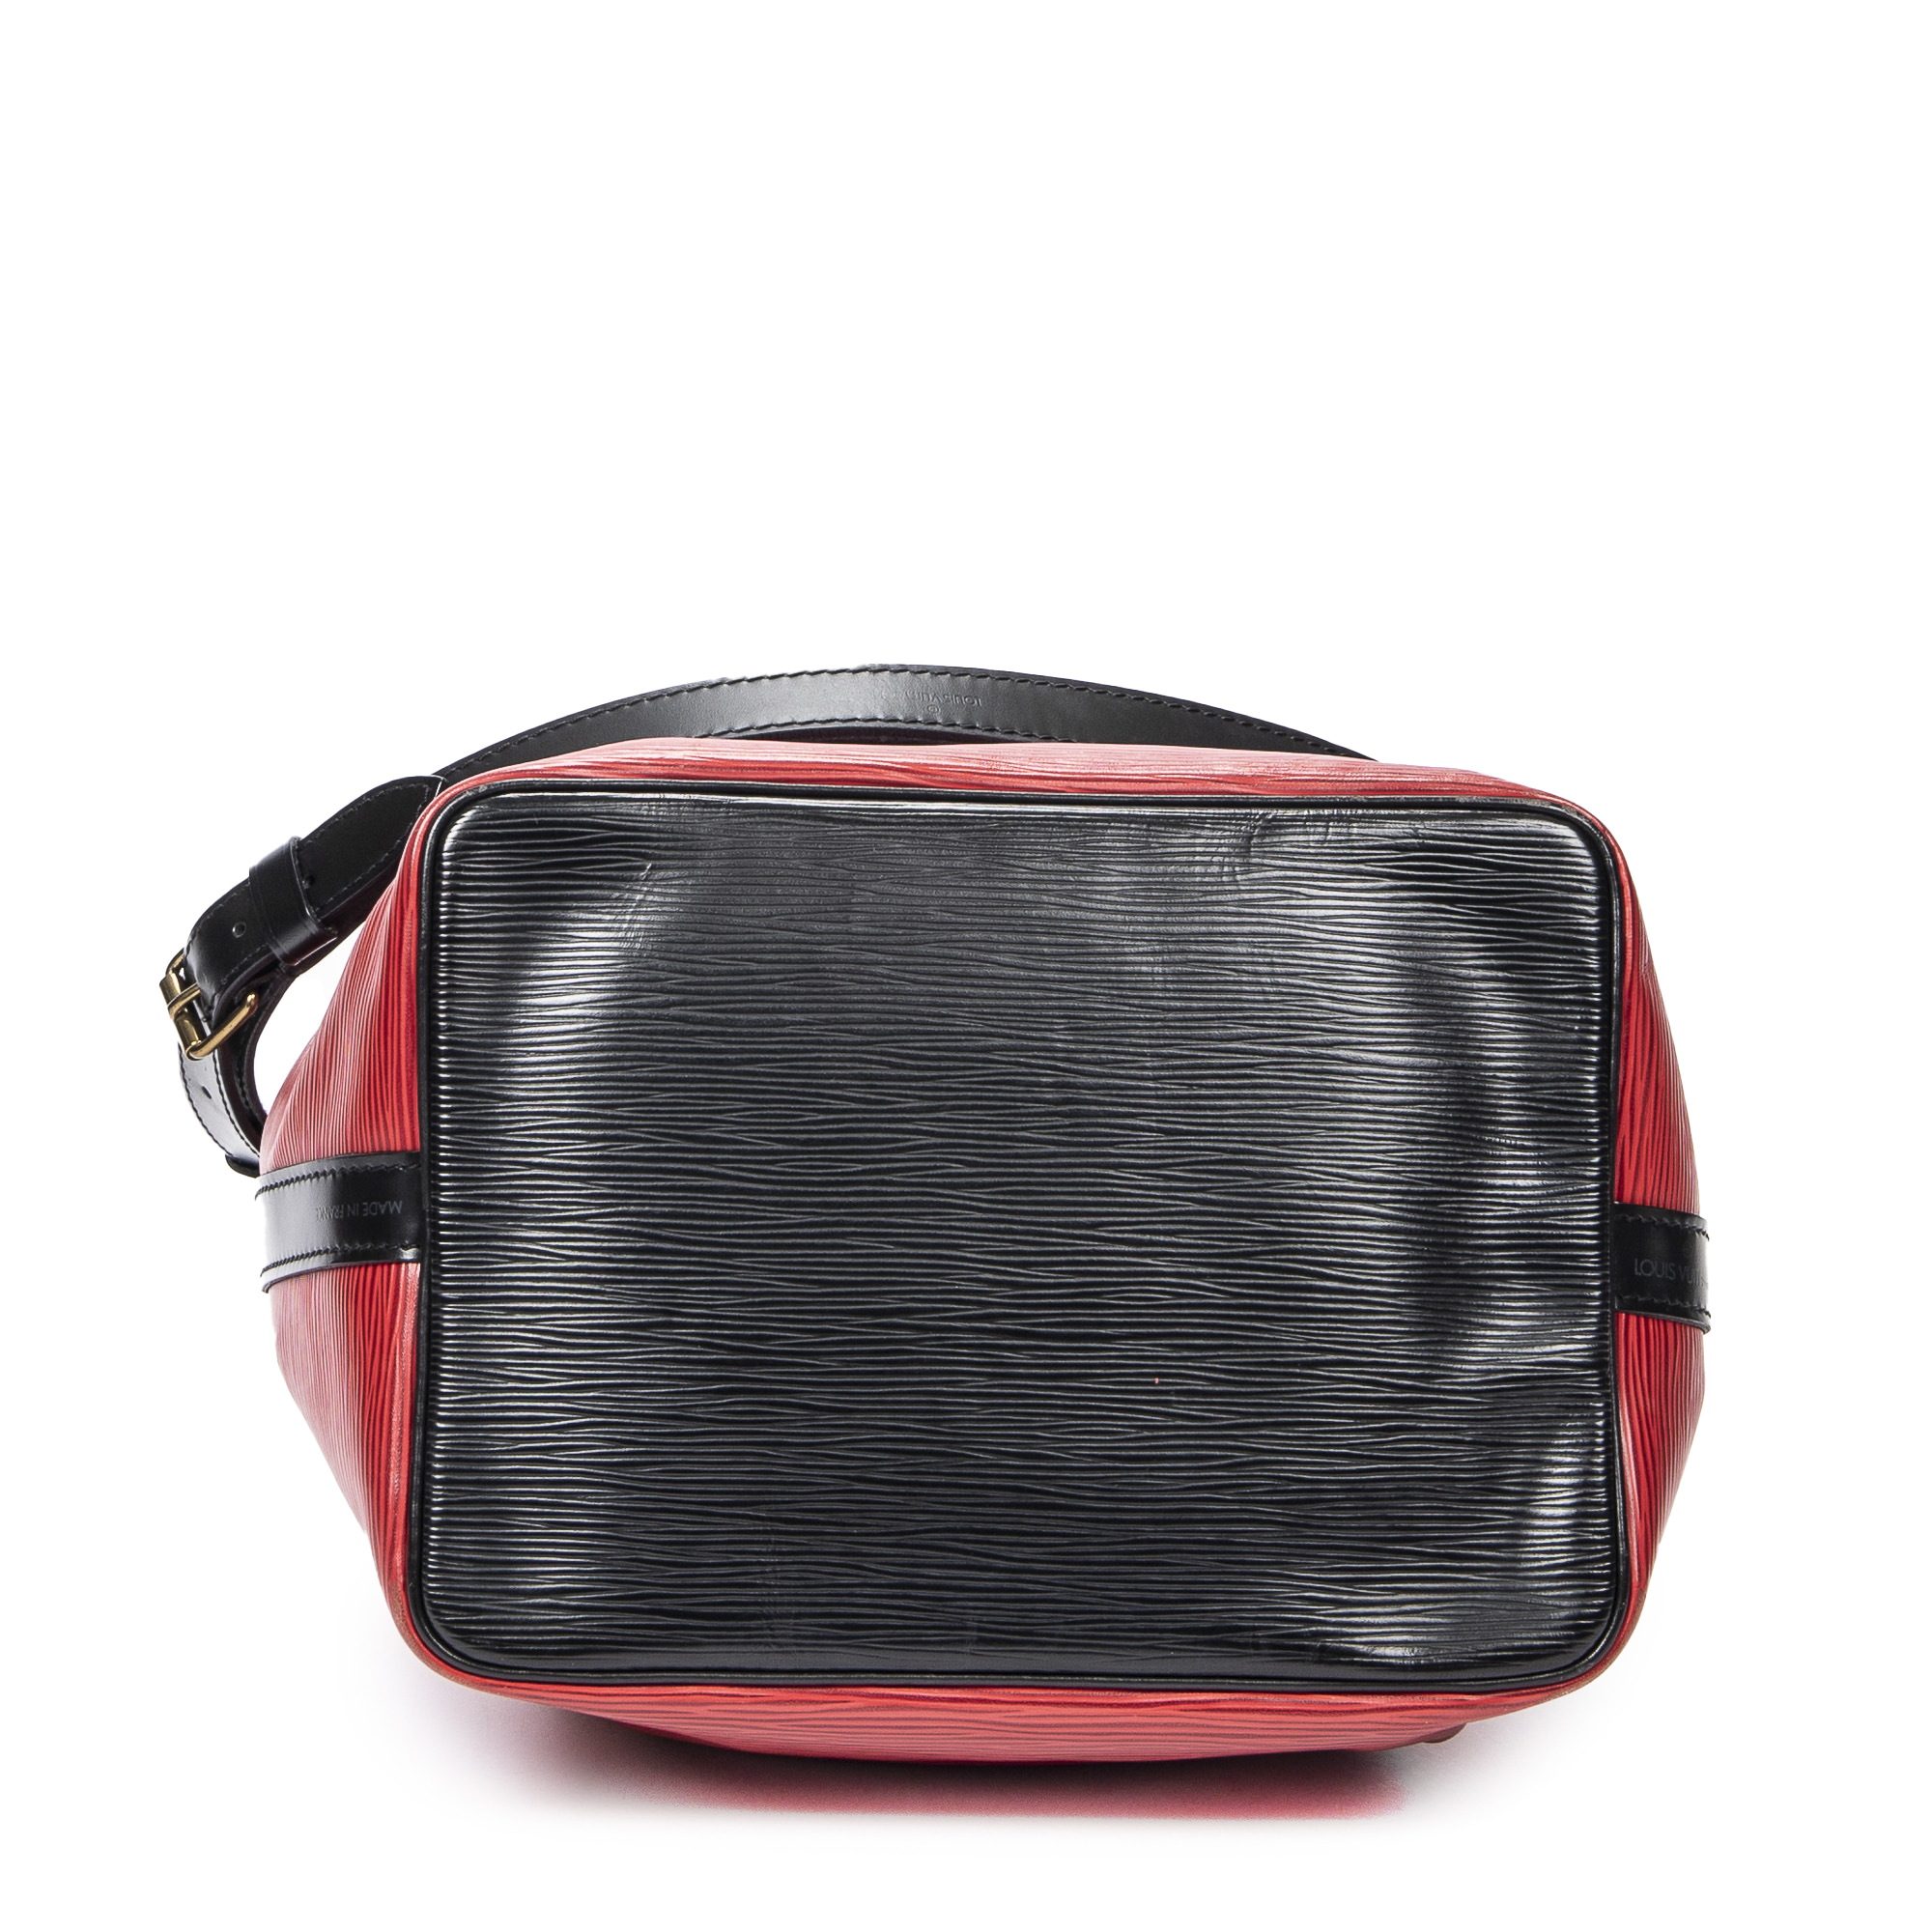 Louis Vuitton Noe Bicolor Black Stitching Pm in Red